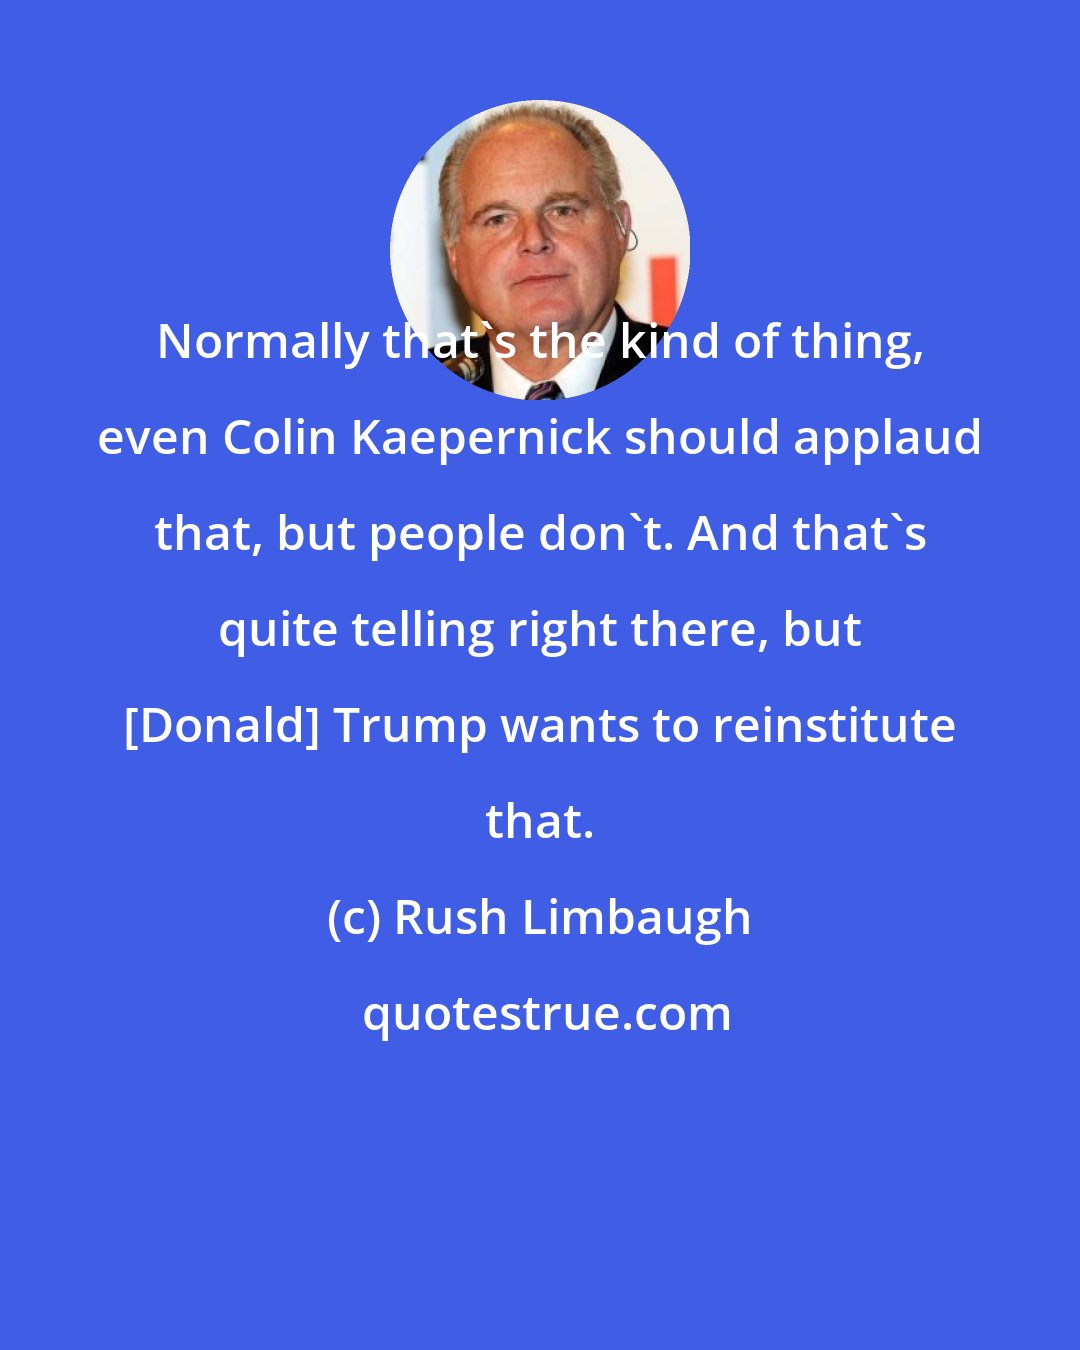 Rush Limbaugh: Normally that's the kind of thing, even Colin Kaepernick should applaud that, but people don't. And that's quite telling right there, but [Donald] Trump wants to reinstitute that.